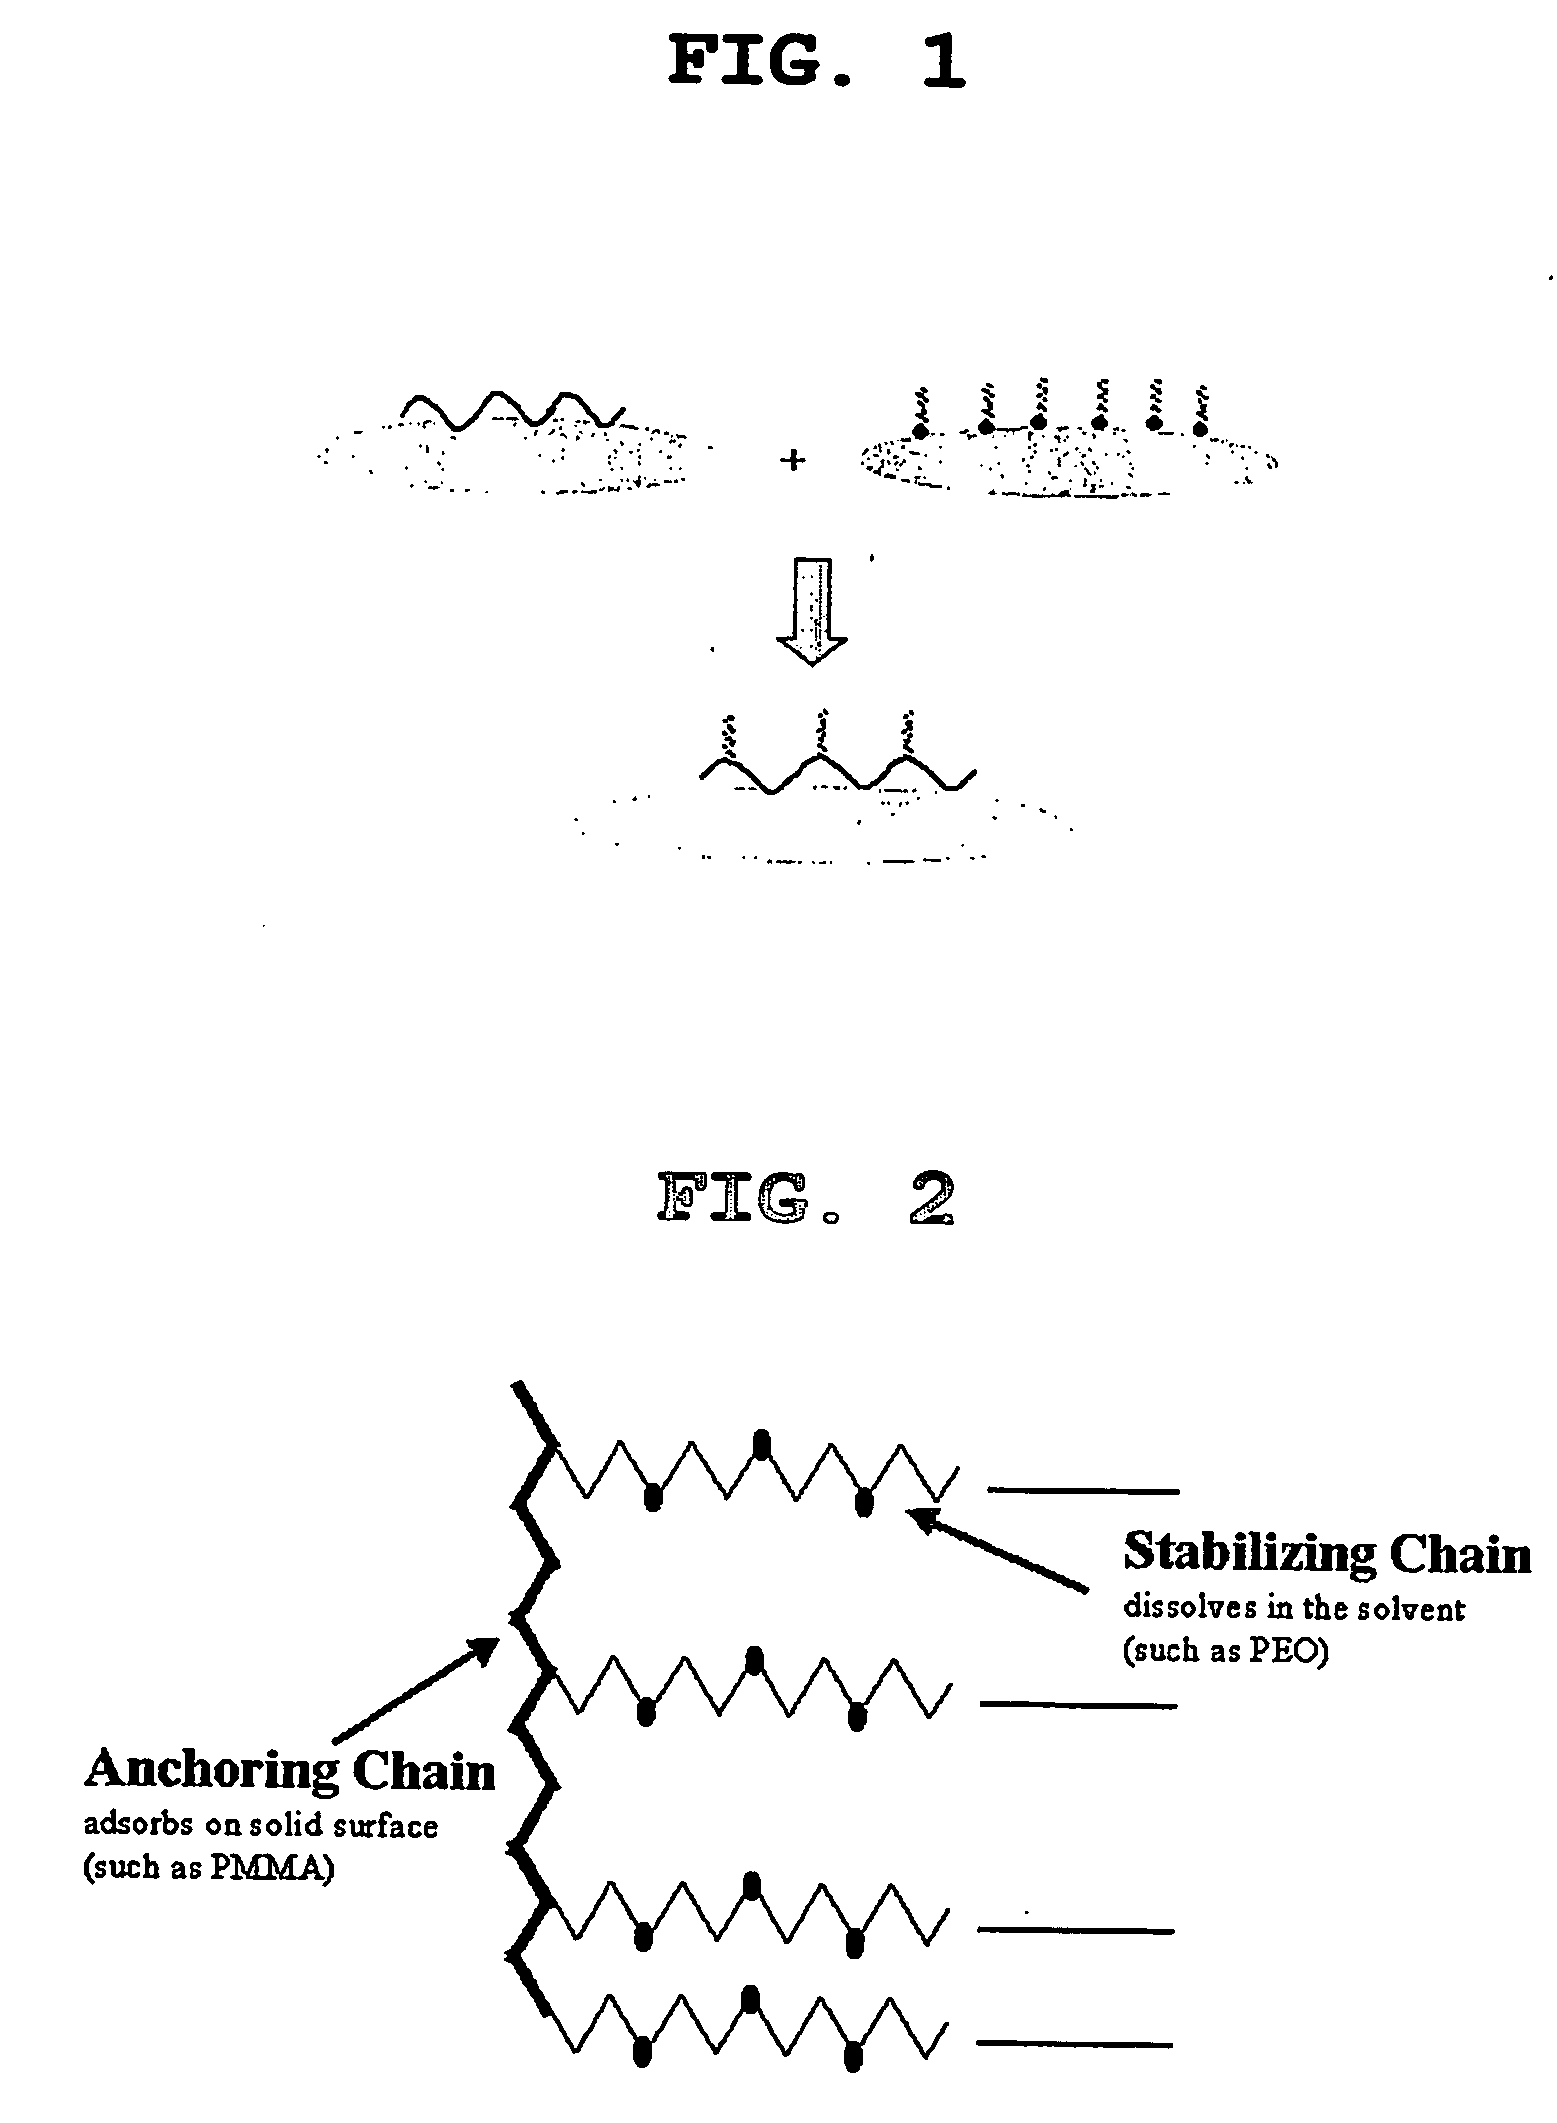 Constitution of the dispersant in the preparation of the electrode active material slurry and the use of the dispersant